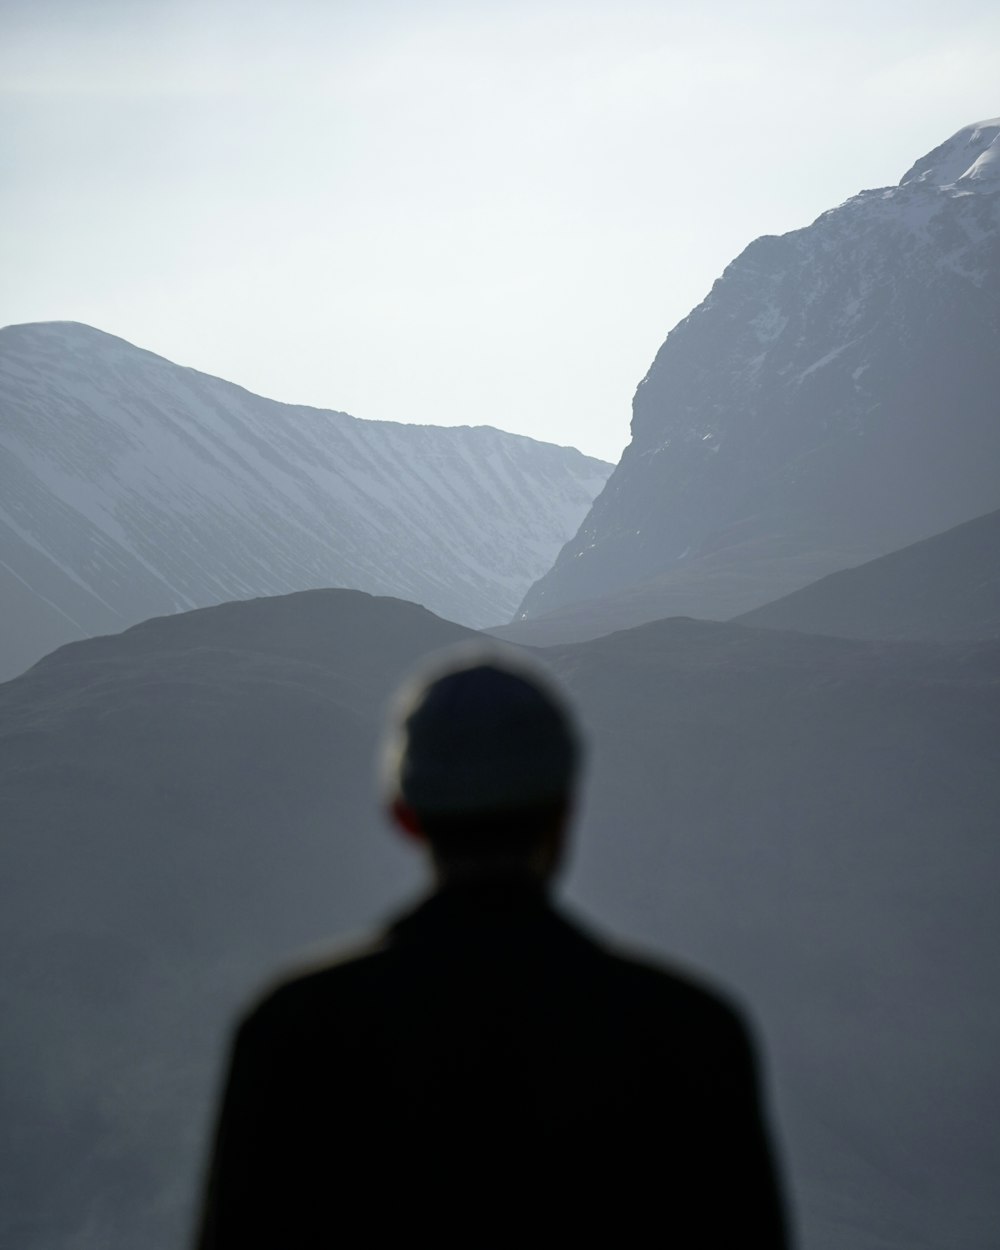 man in black jacket standing on top of mountain during daytime